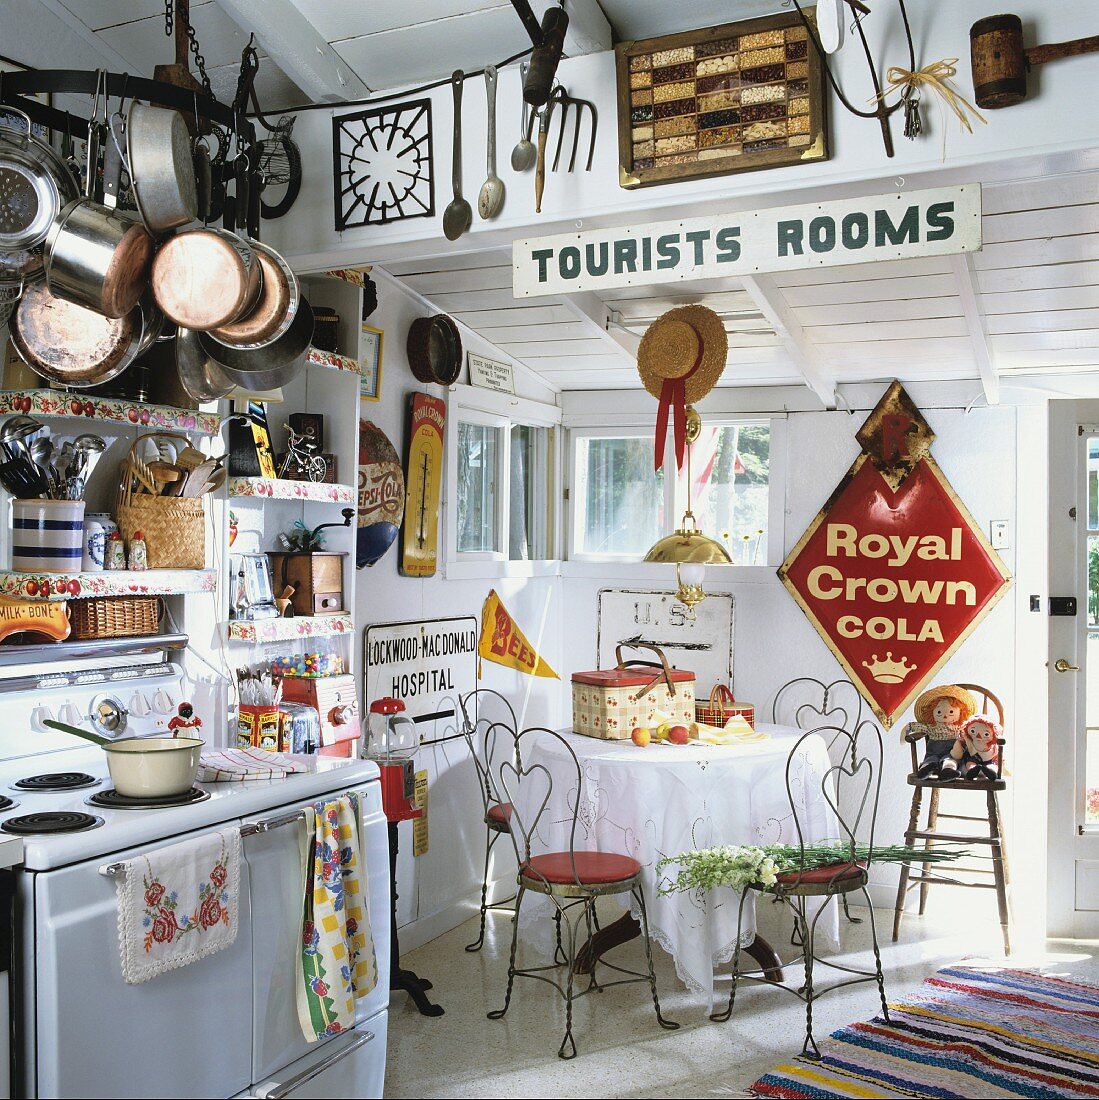 Kitchenette with corner window, round dining table, delicate metal chairs, old-fashioned cooker and colourful collection of signs